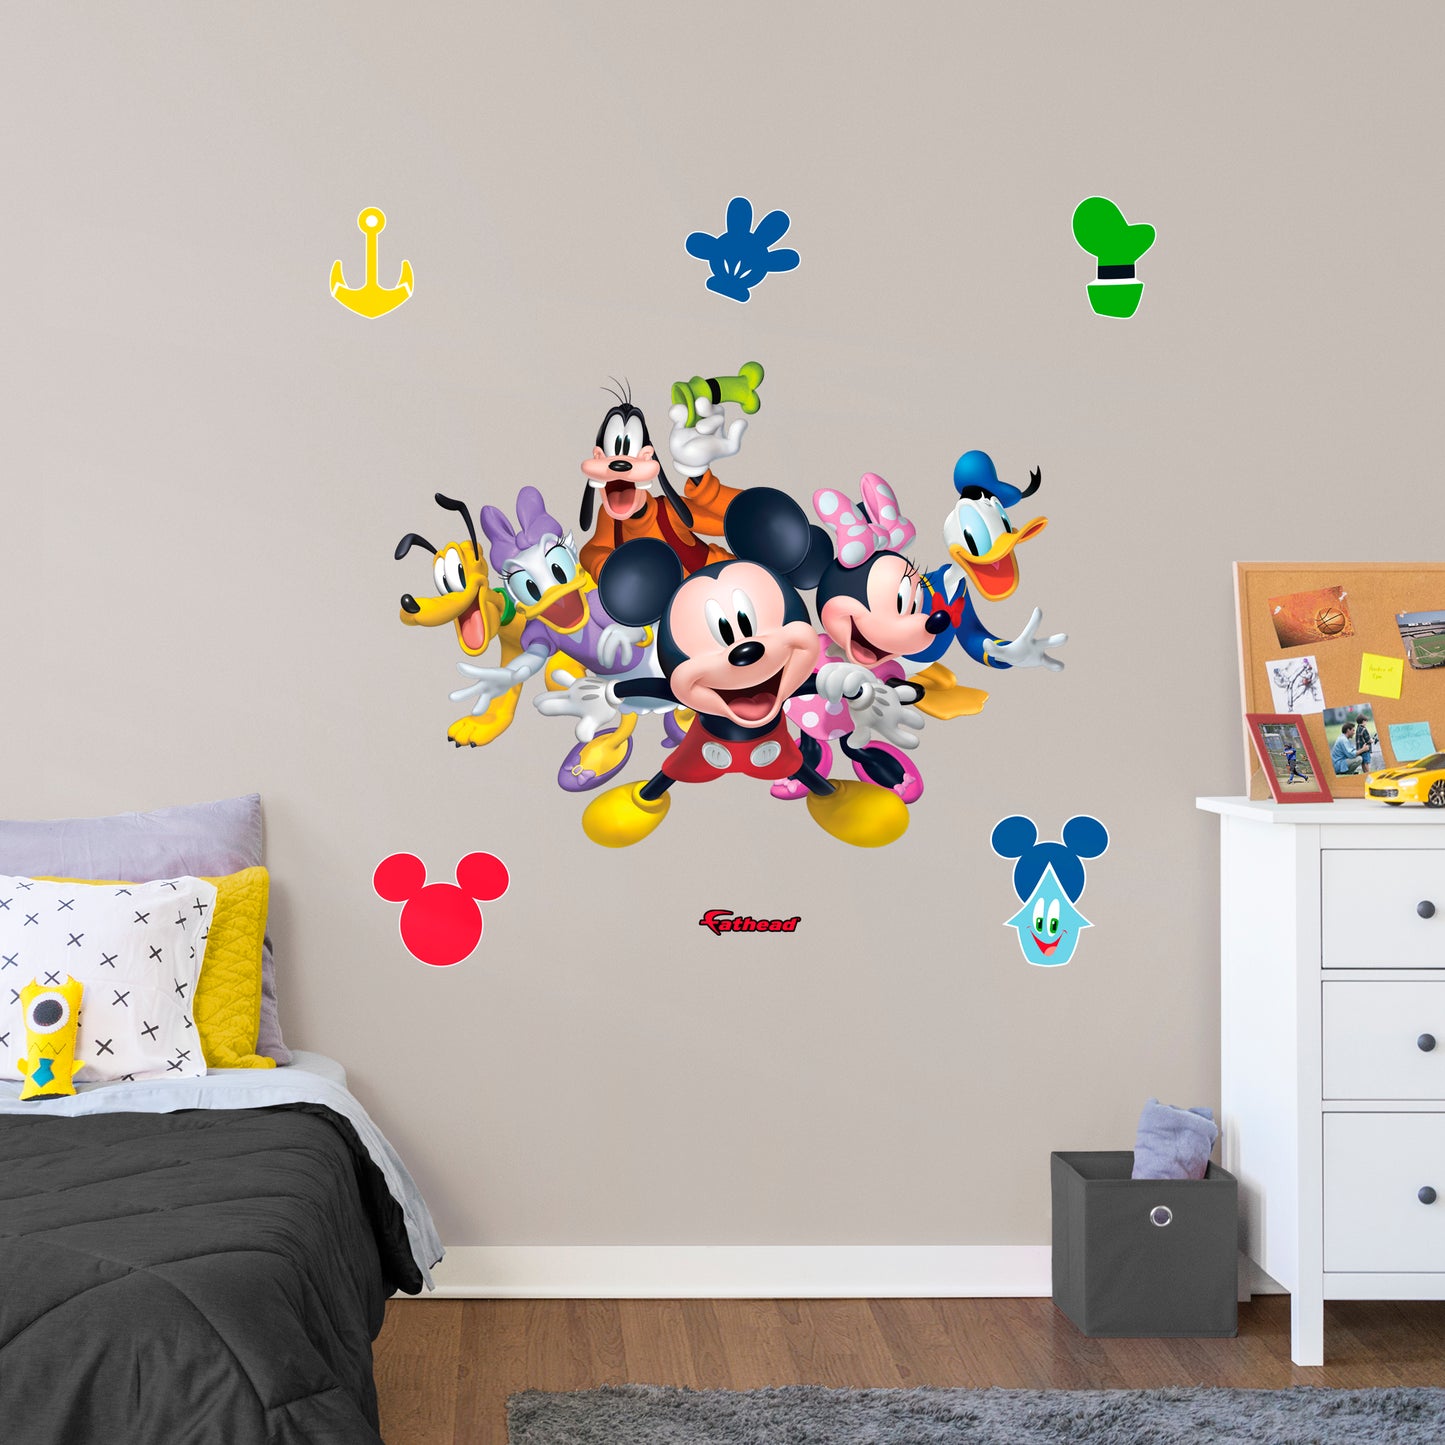 Giant Character + 6 Decals (50"W x 36"H)